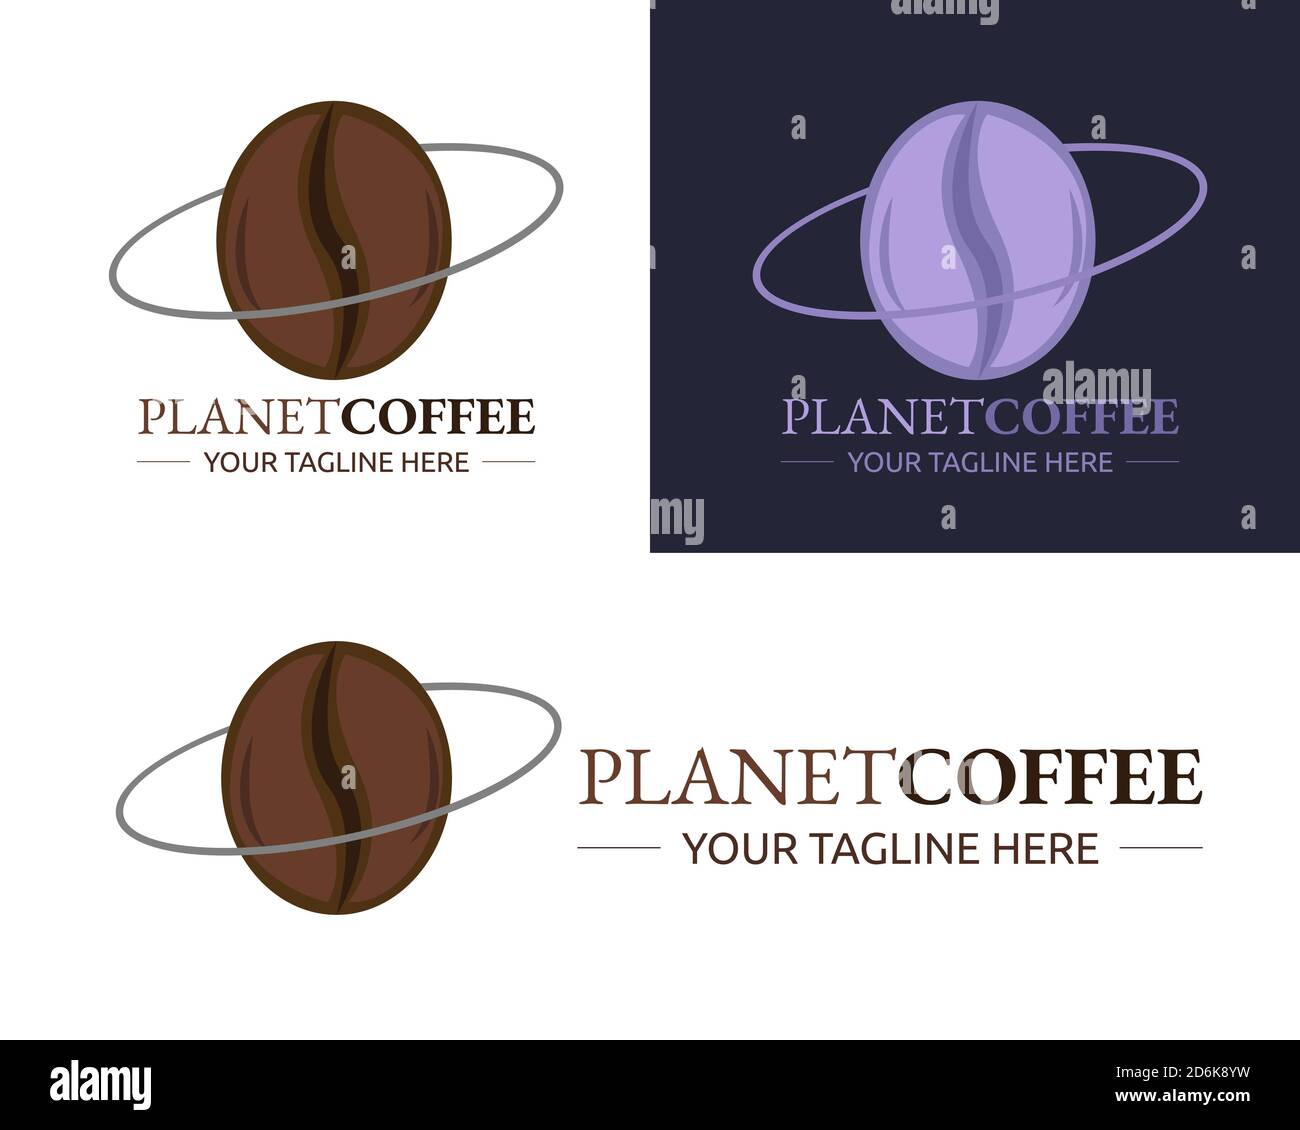 Illustration vector design of planet coffee logo template for business or company Stock Vector